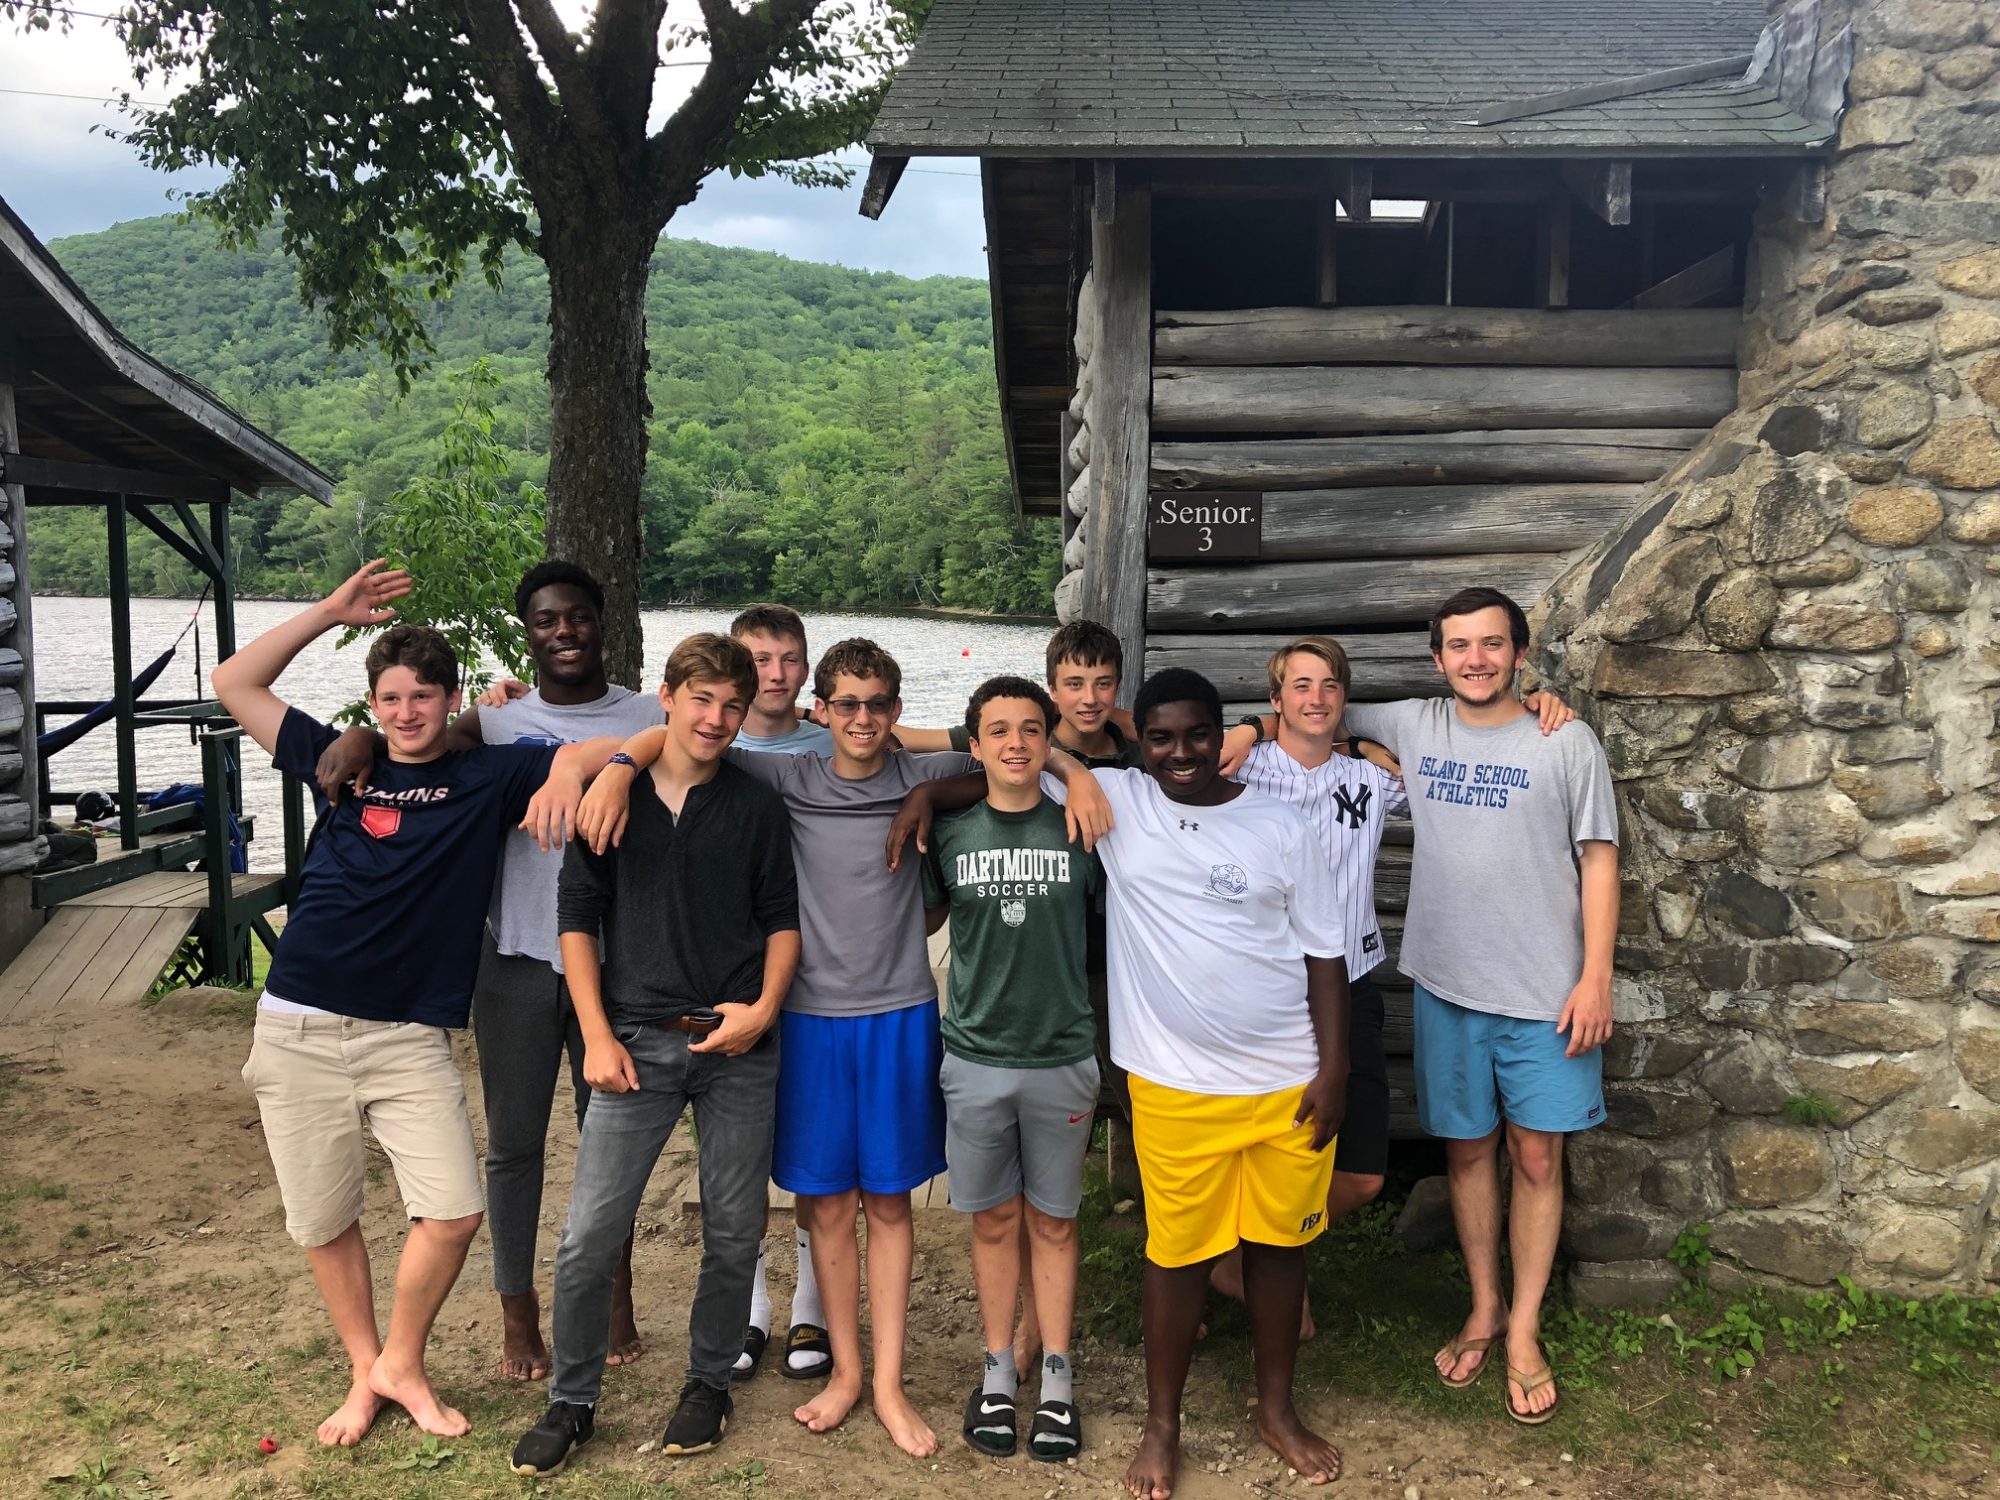 A photo of happy Pemi senior campers in front of a cabin